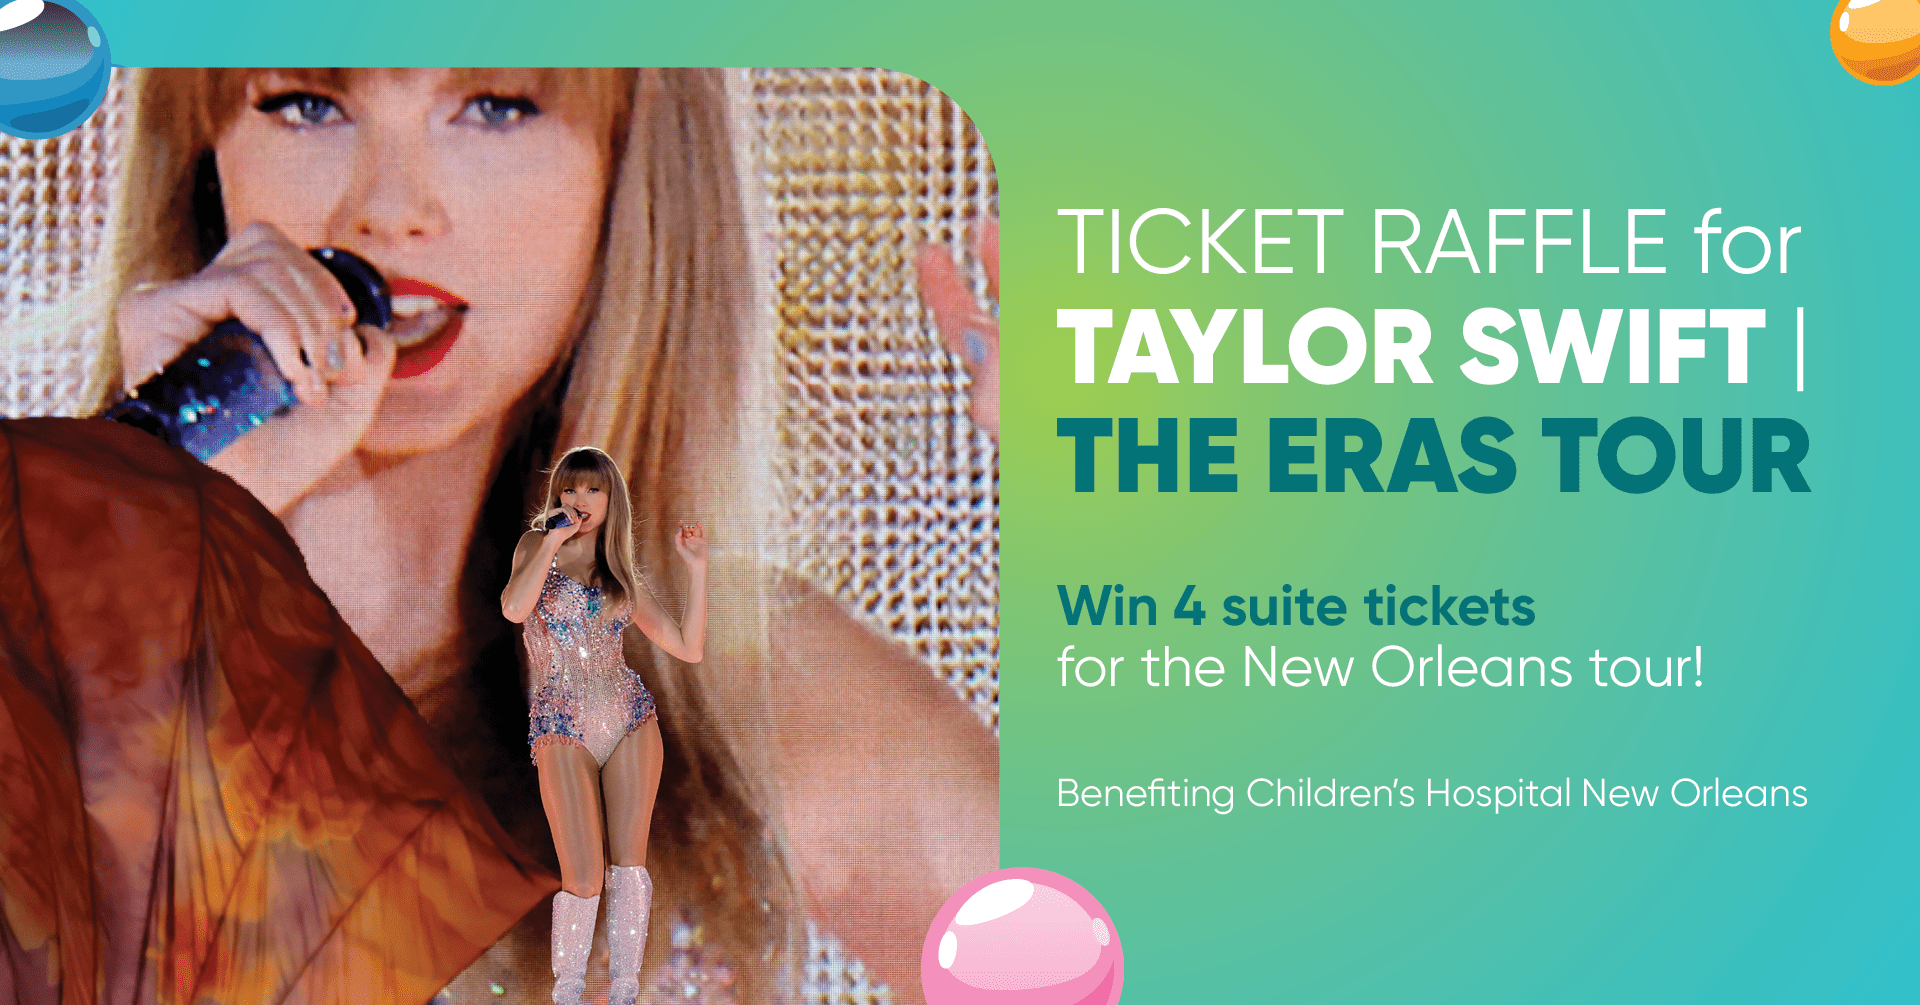 Enter to win tickets to see Taylor Swift 